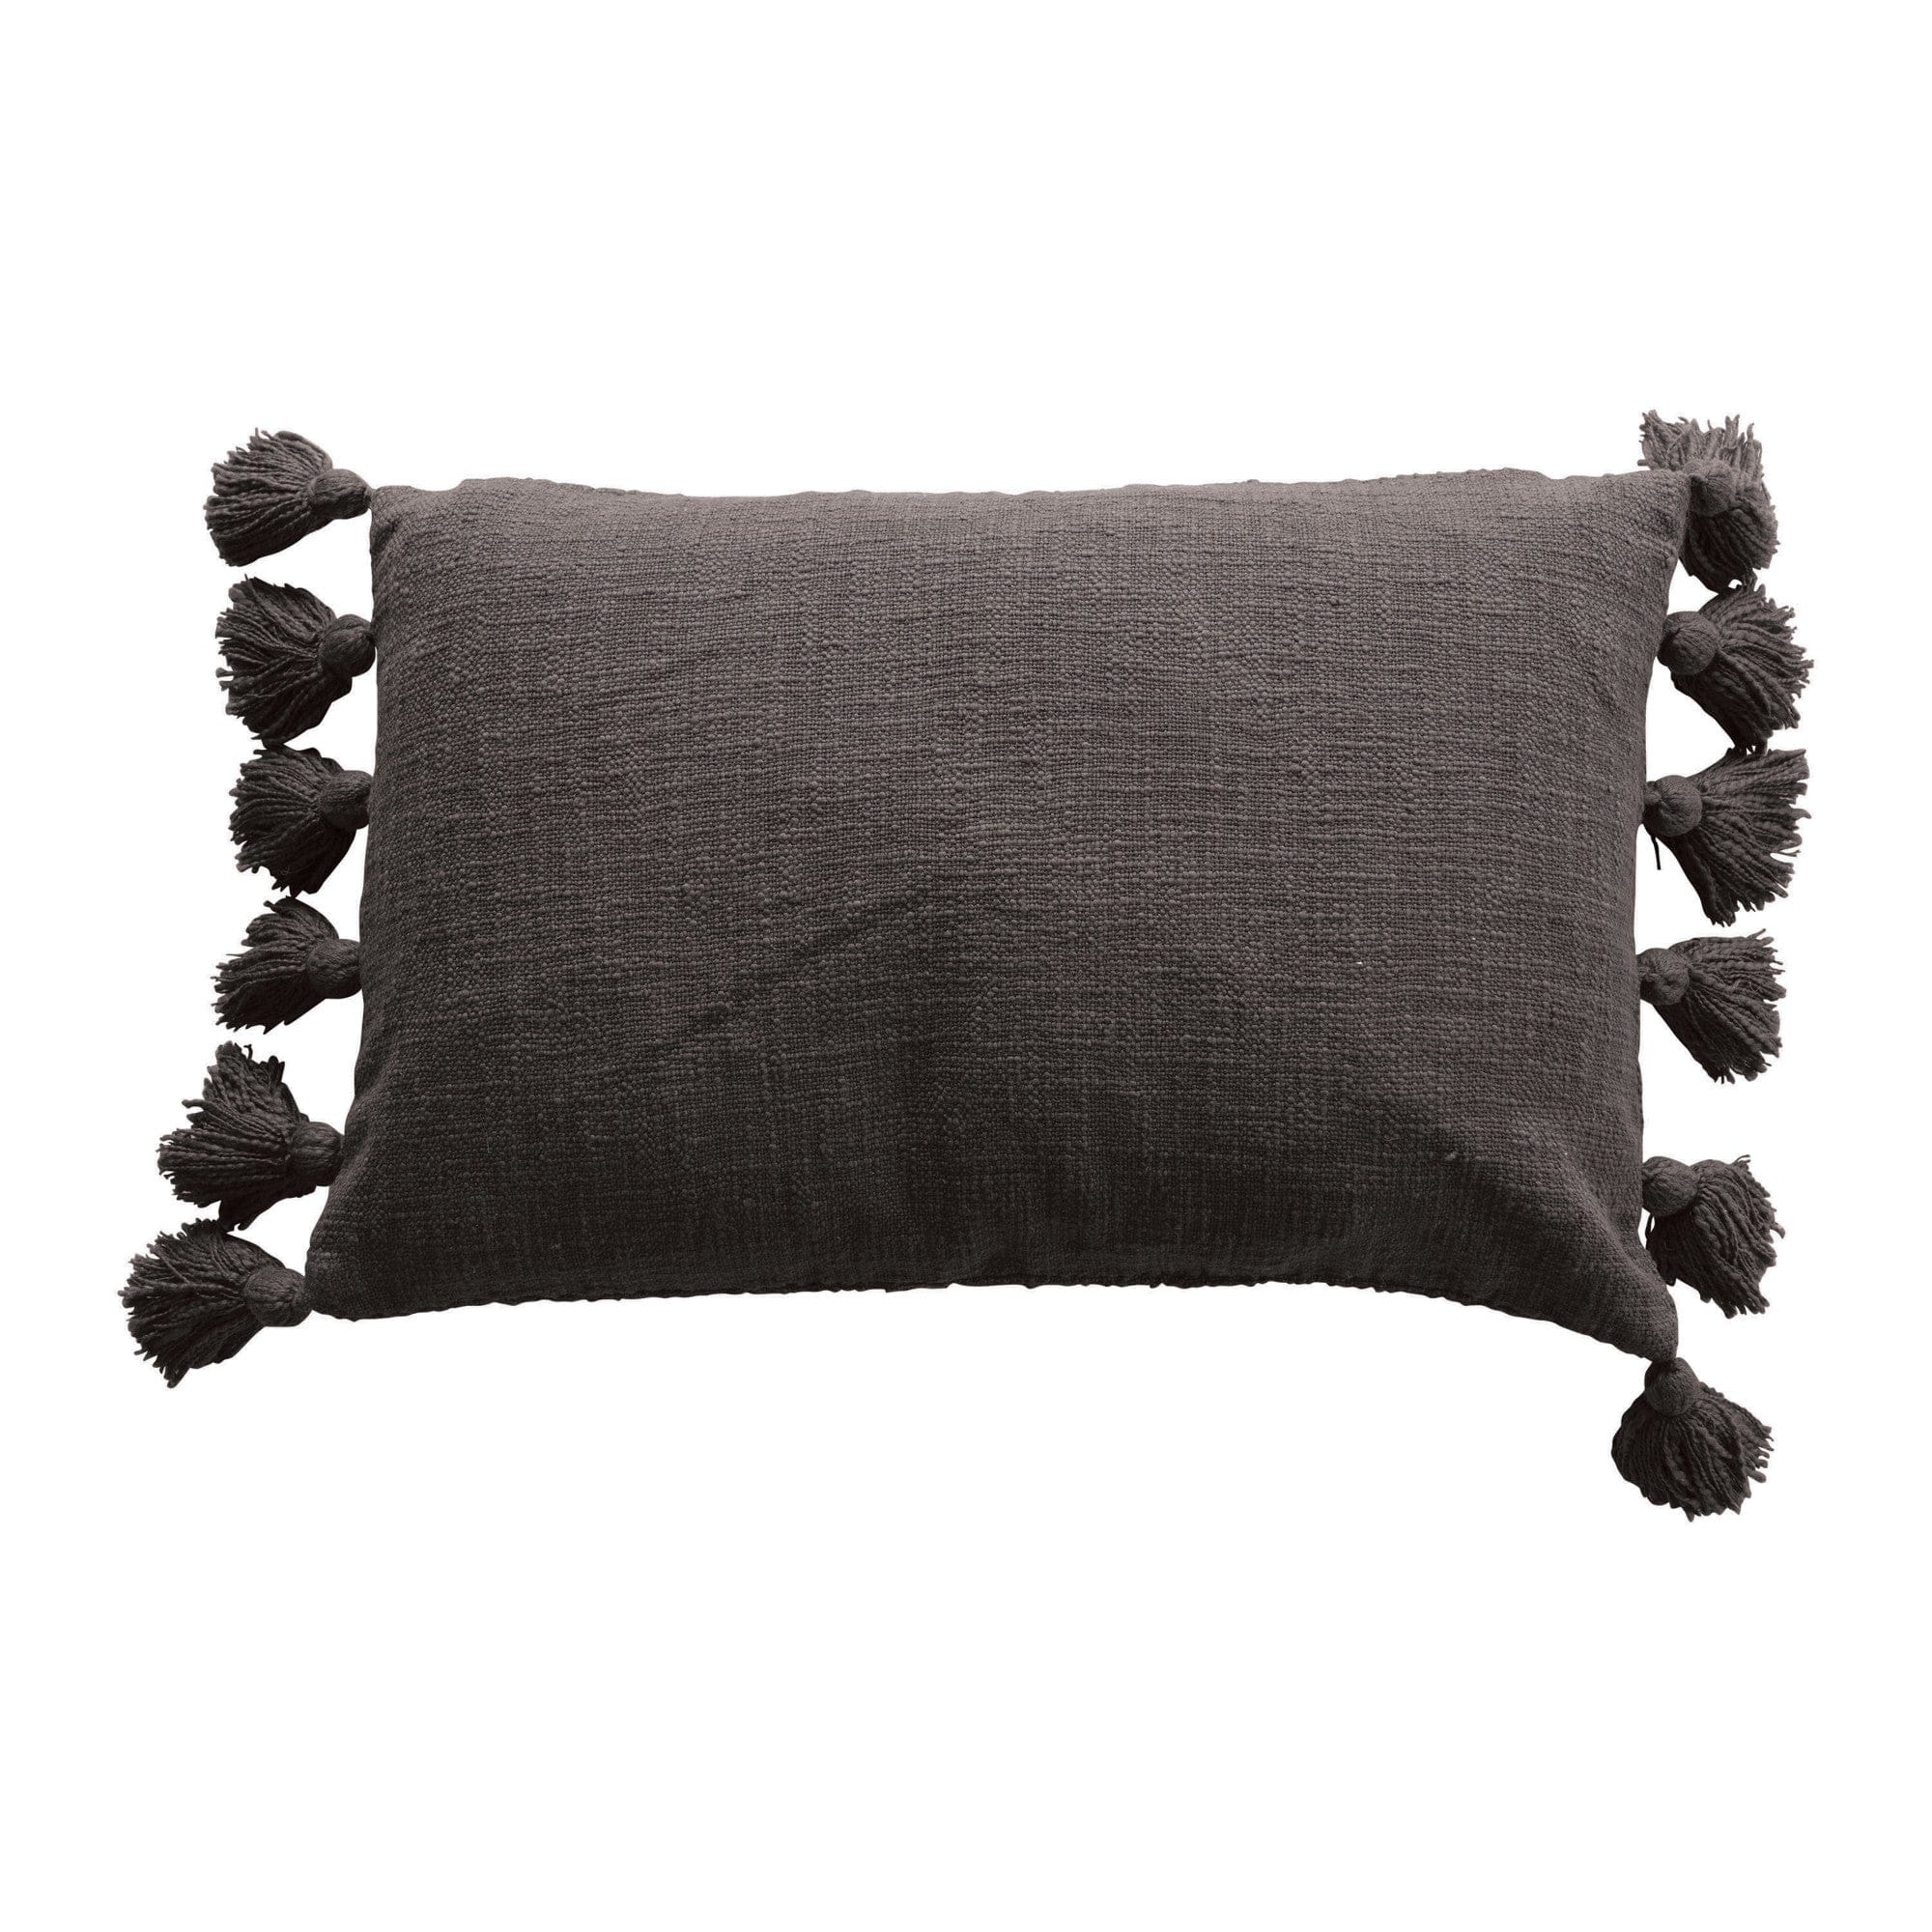 Iron Cotton Lumbar Pillow with Tassels 24" x 16"W - Five and Divine